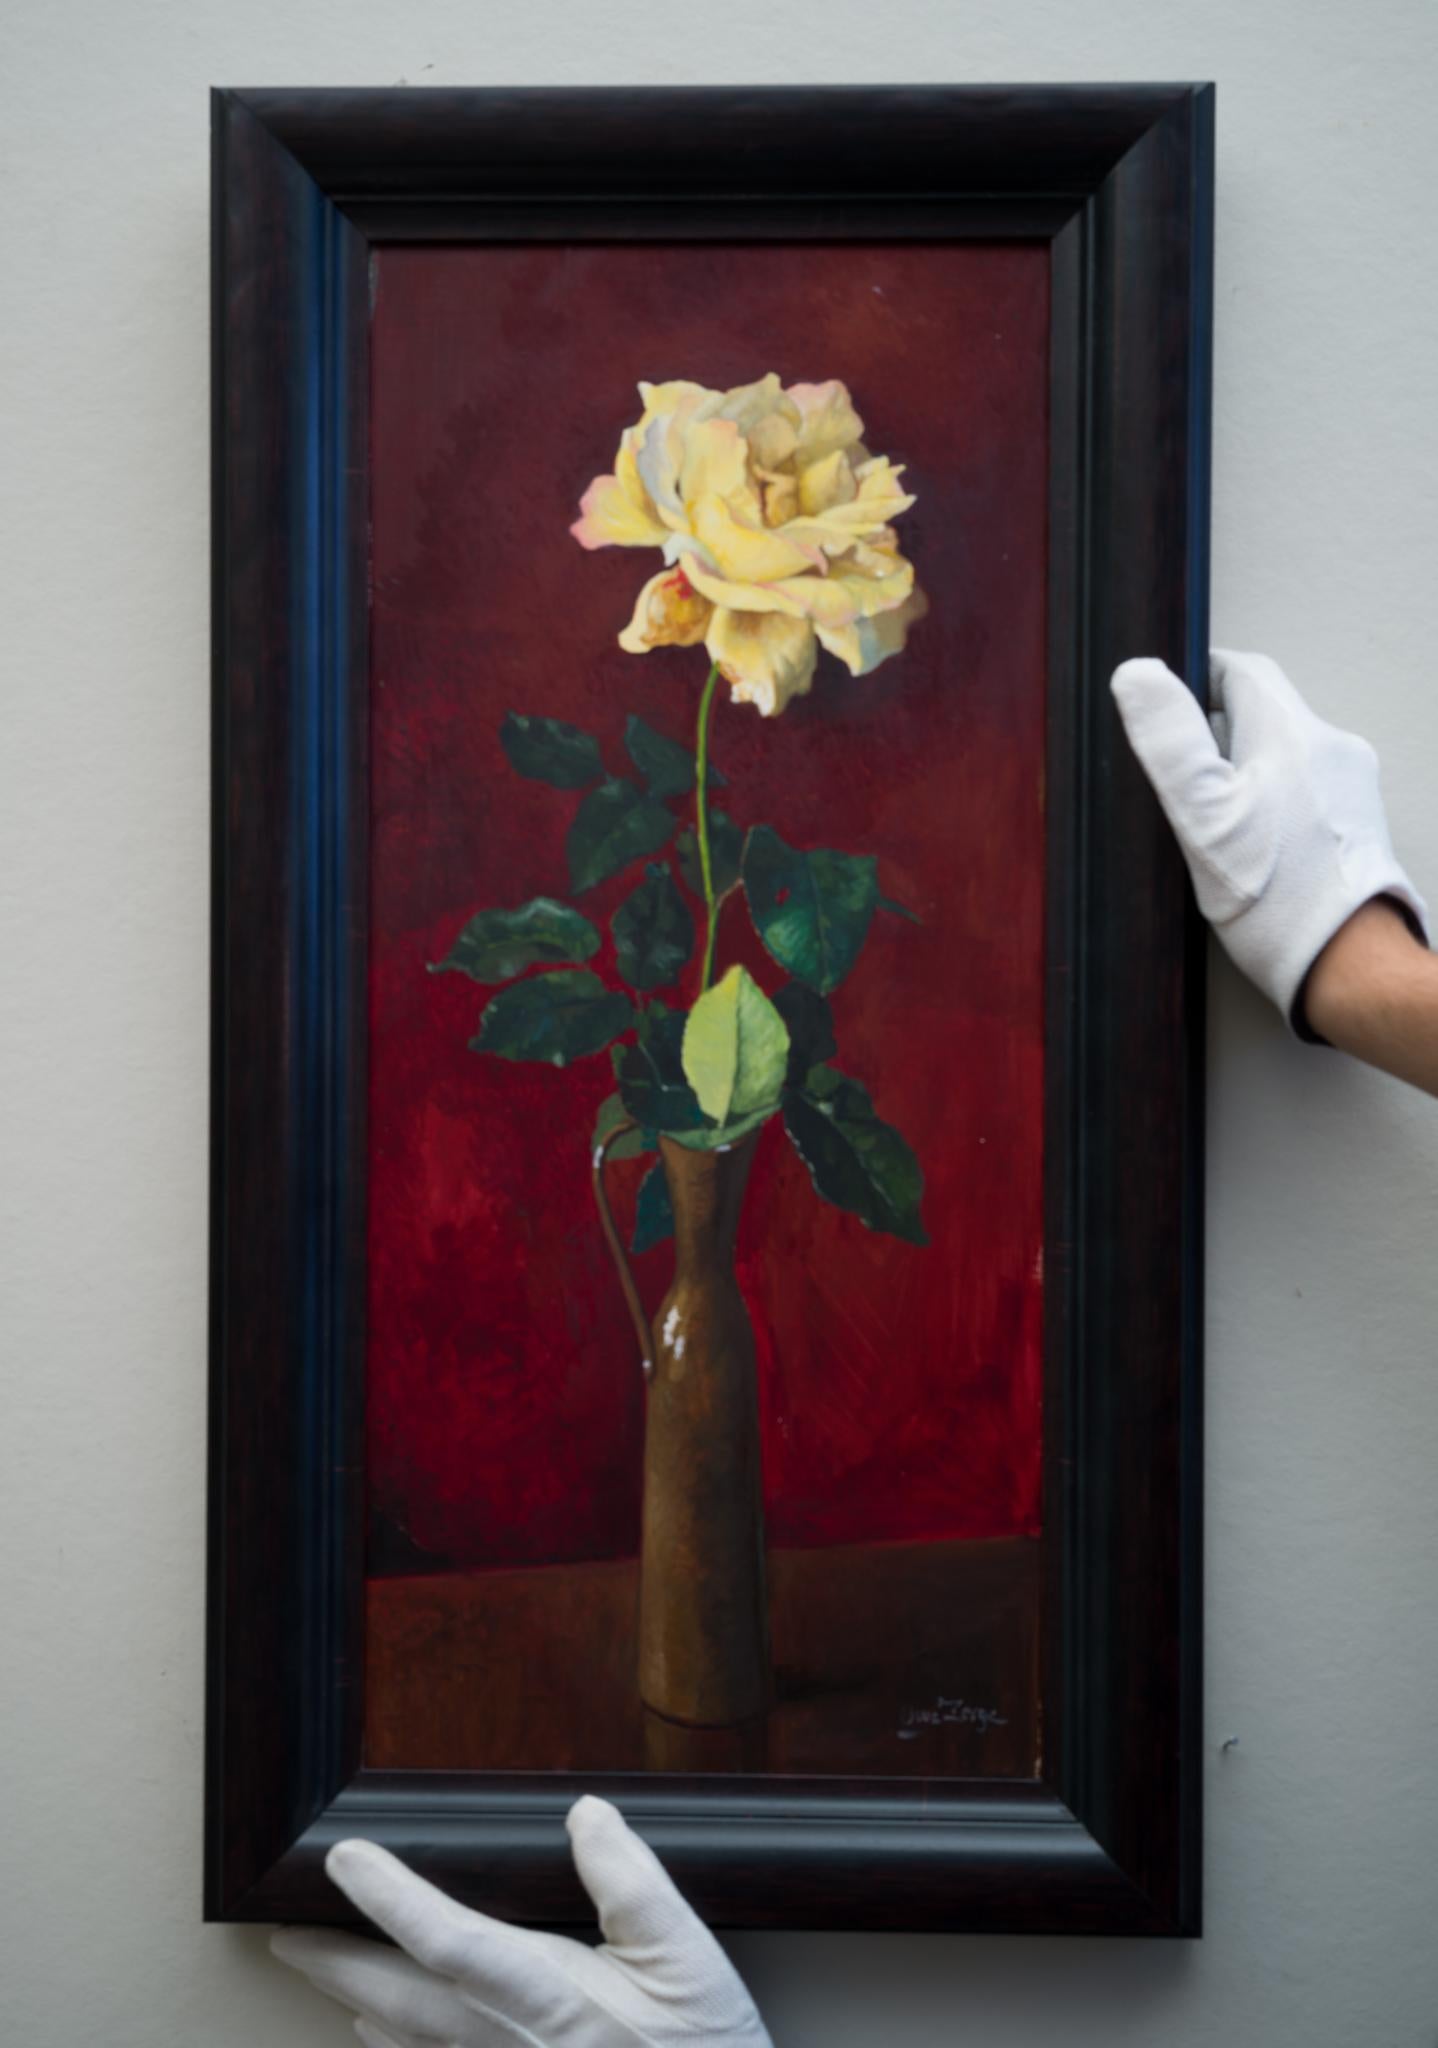 This piece presents an exquisite yellow rose, its petals meticulously detailed to the extent that they almost leap off the canvas, offering viewers a near three-dimensional experience.

Set against a deep burgundy backdrop, the rose sits gracefully